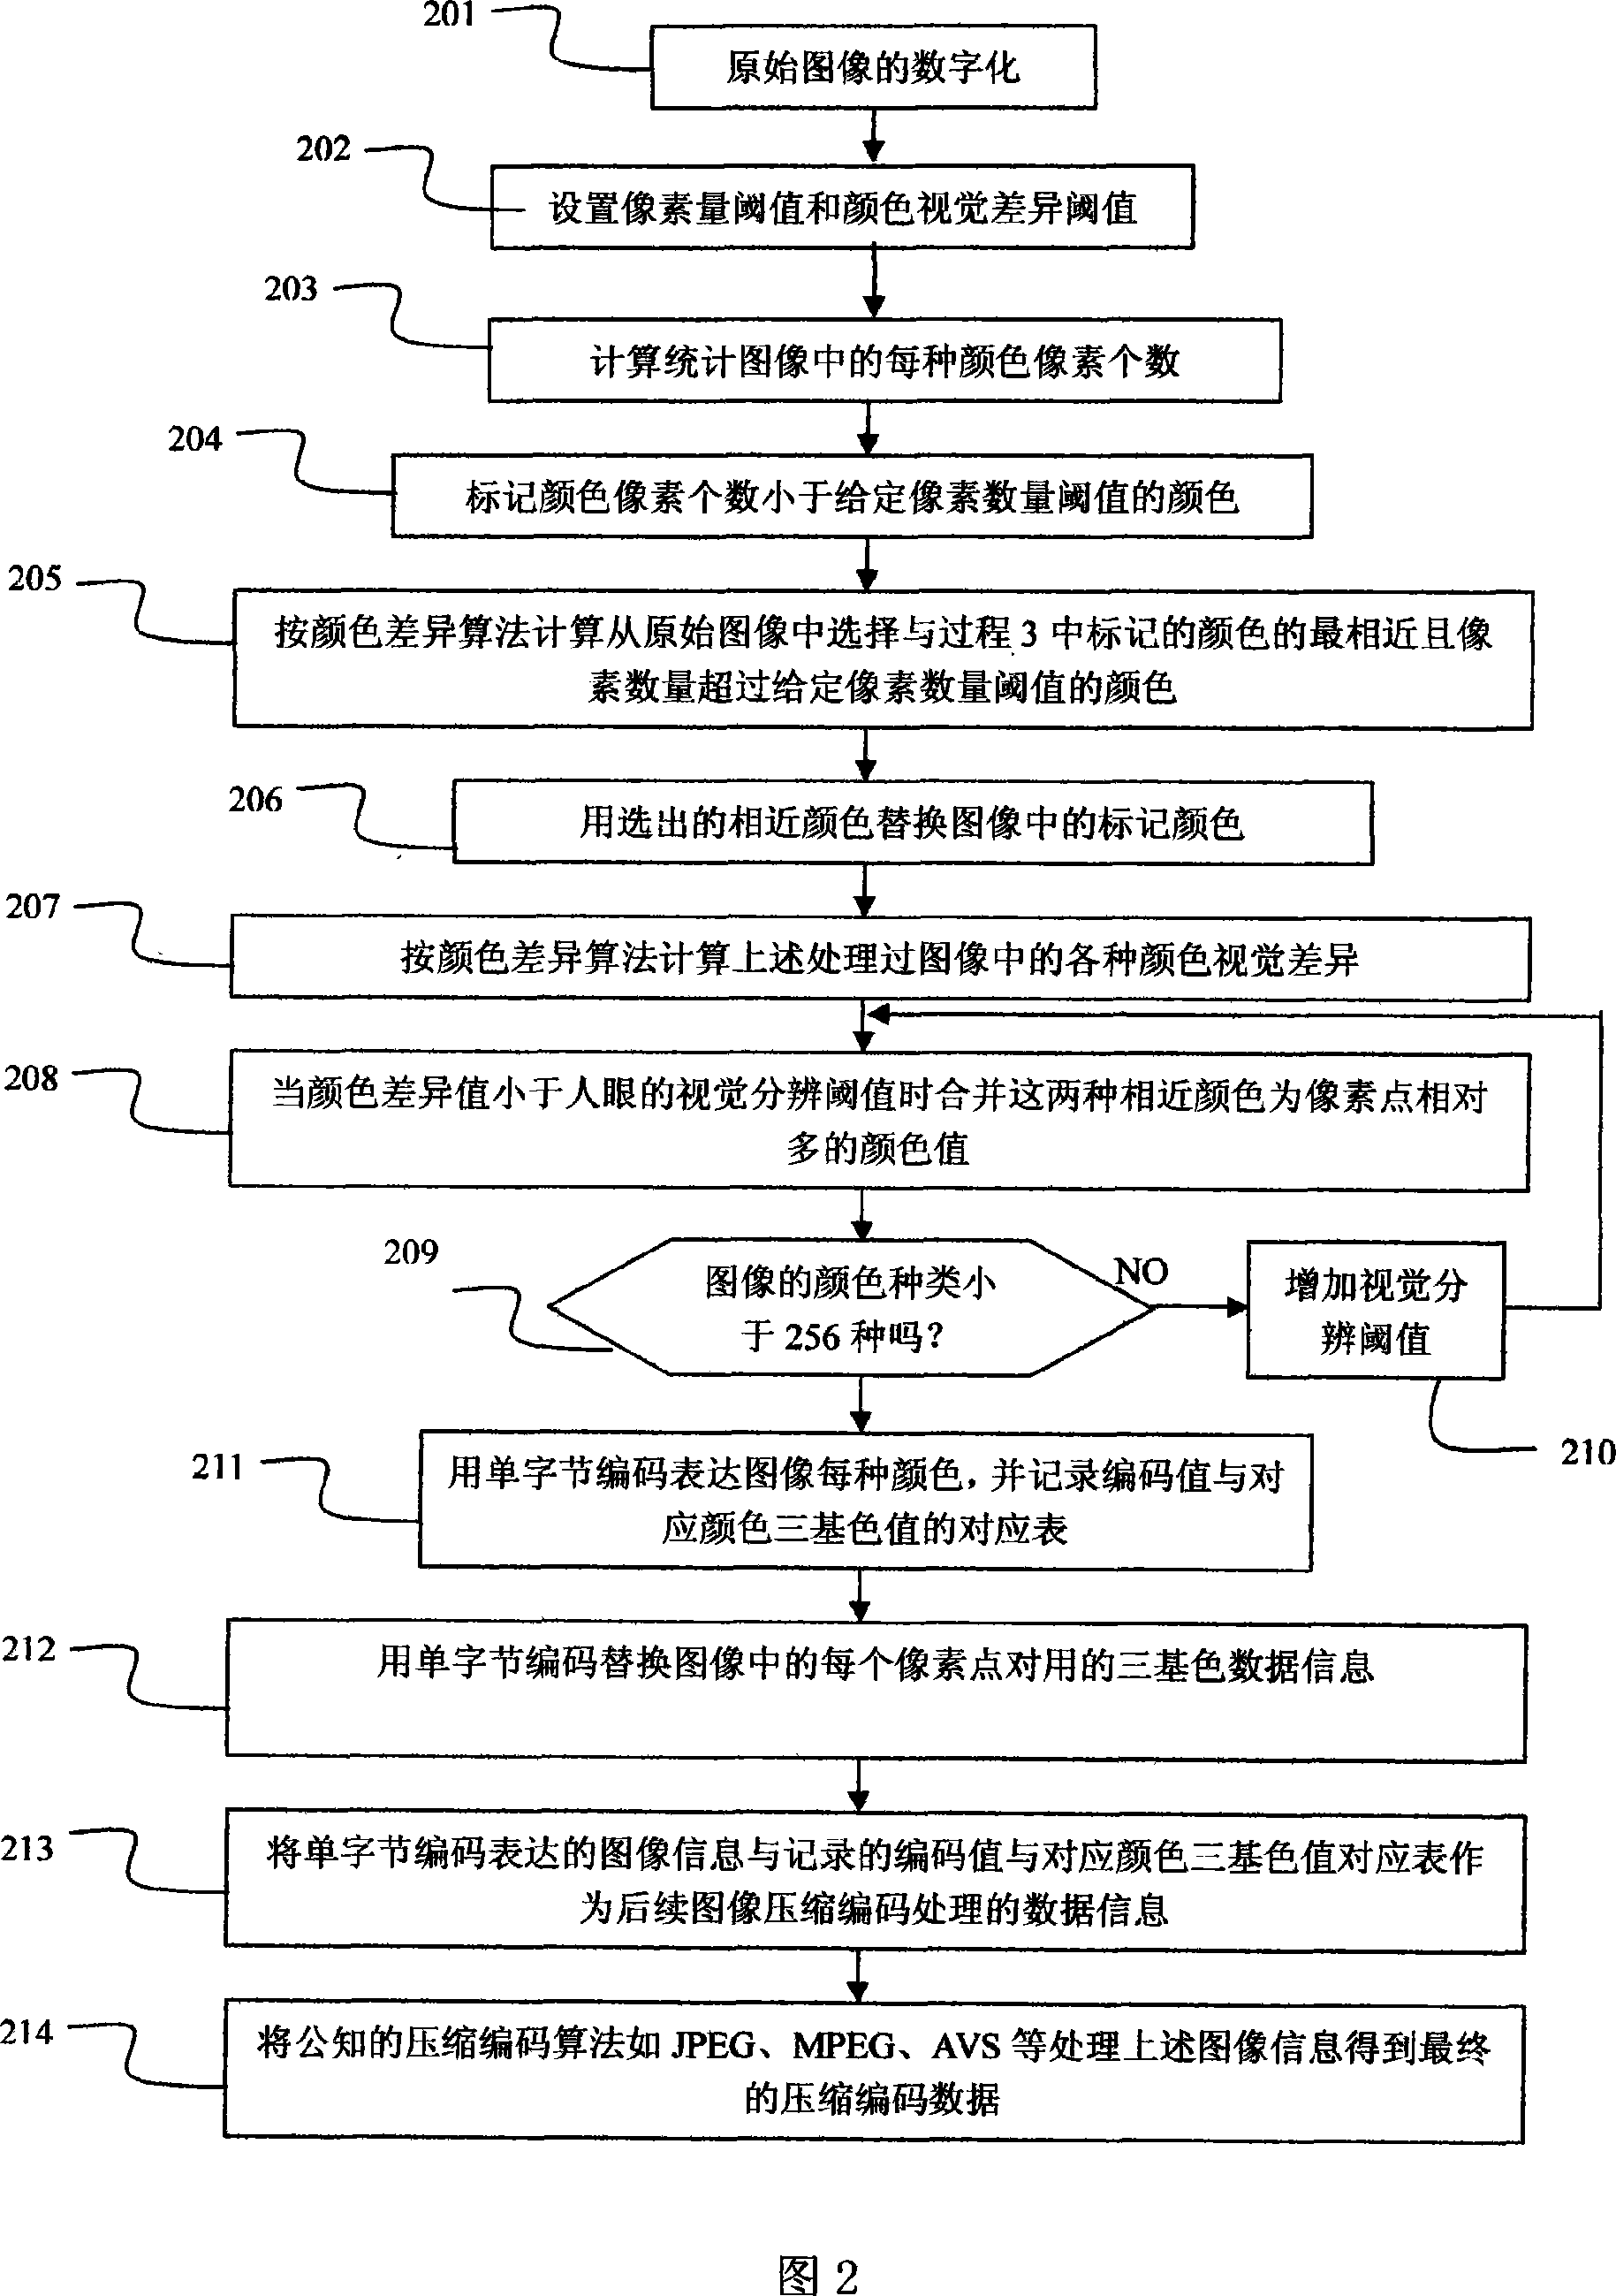 Image coding and decoding processing method based on picture element st atistical characteristic and visual characteristic